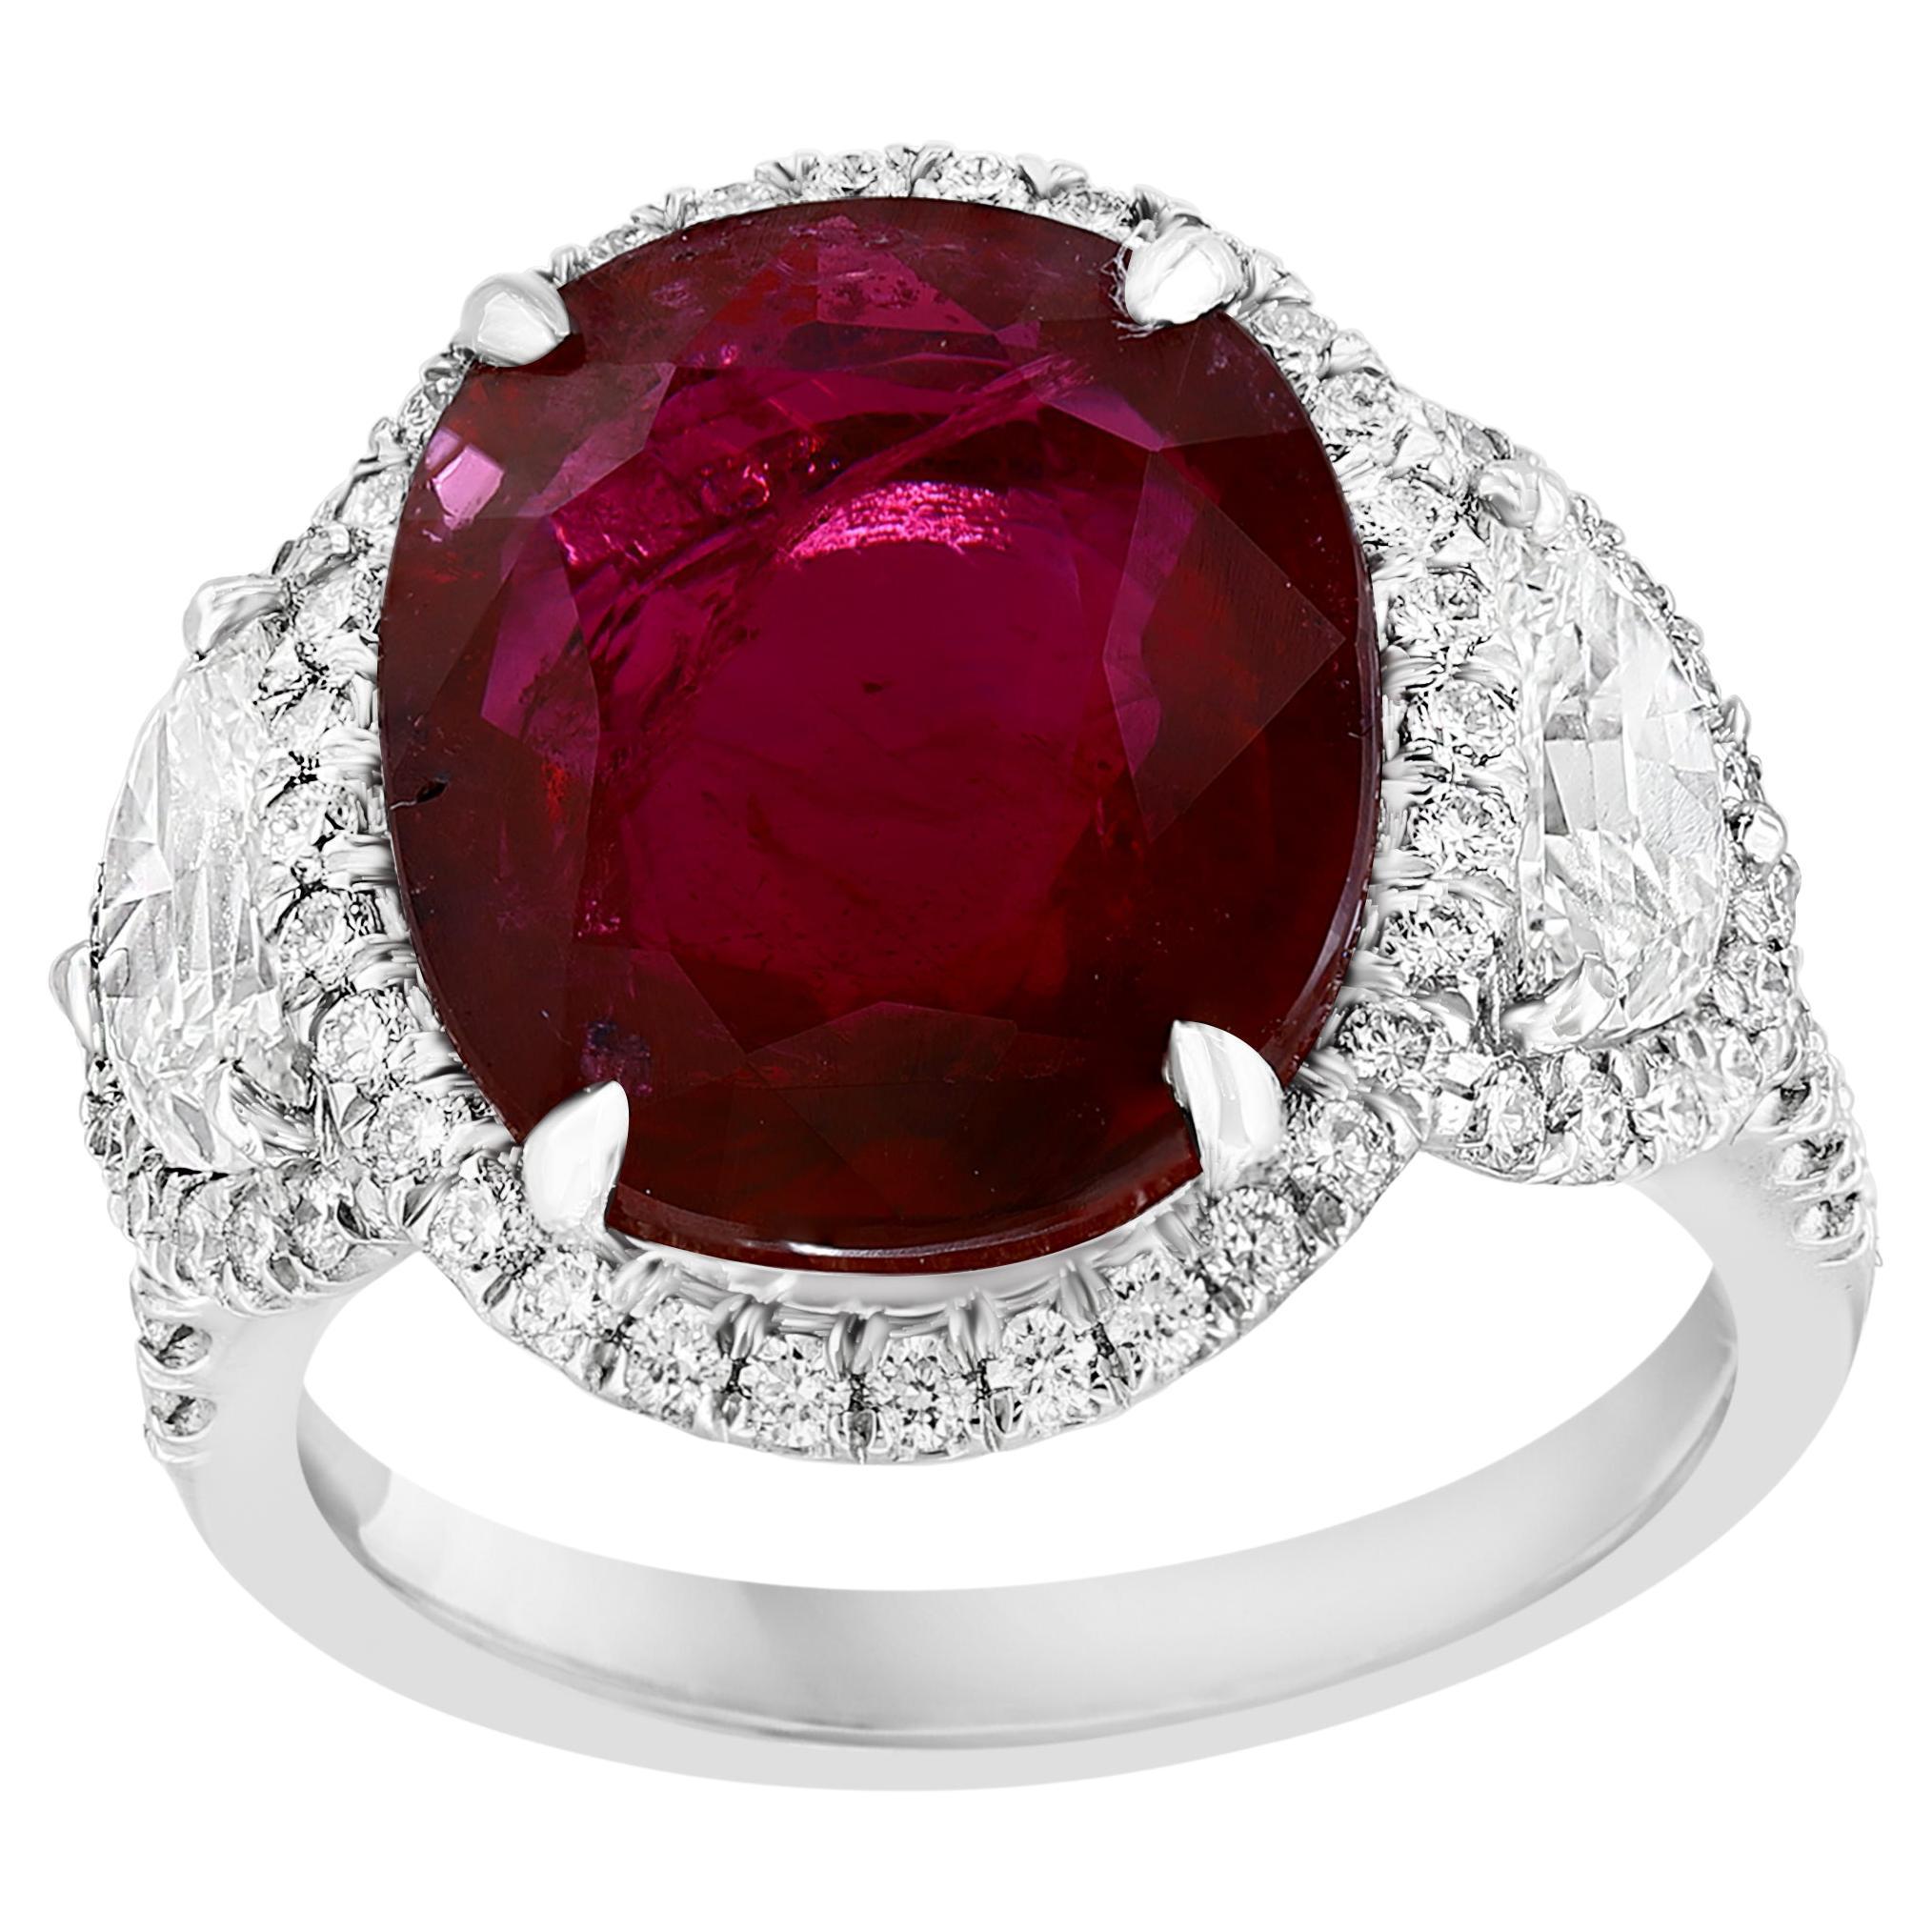 Certified 8.02 Carat Oval Cut Ruby and Diamond Three-Stone Halo Ring in Platinum For Sale